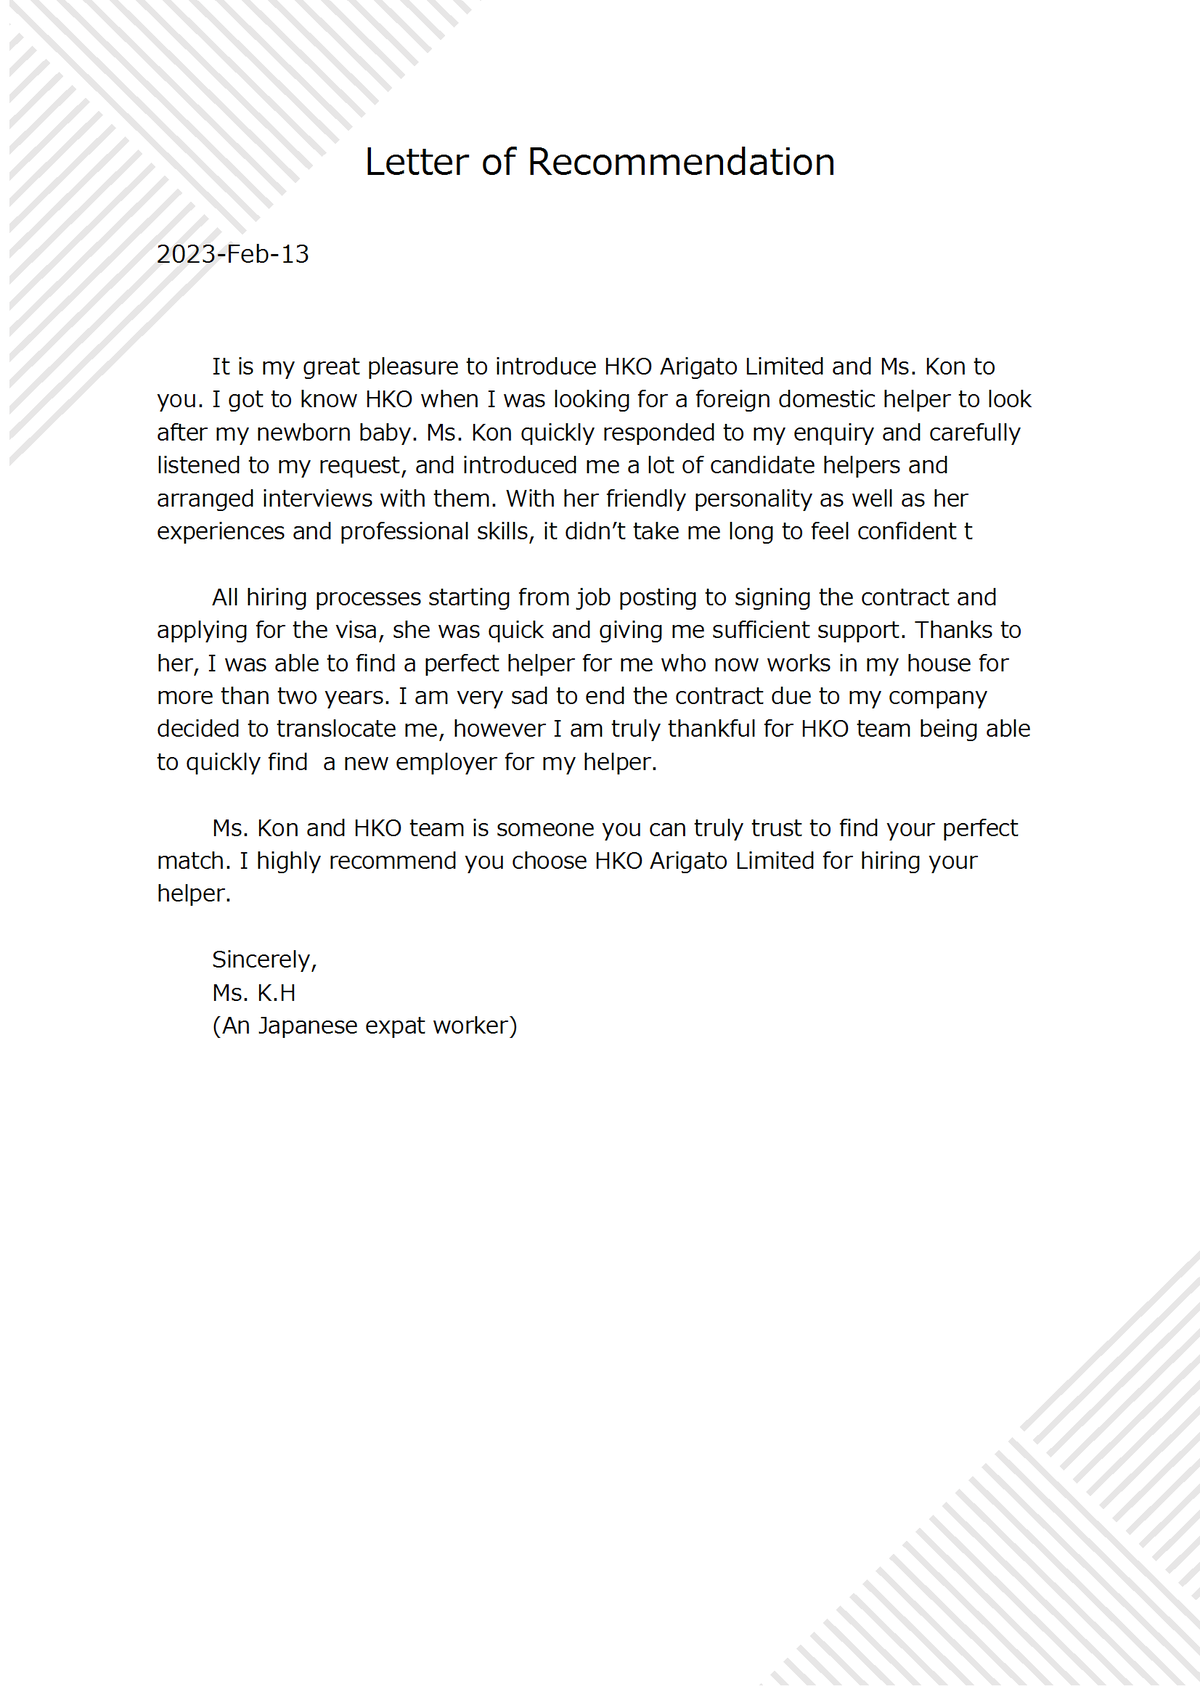 Letter of Recommendation from HKO Client